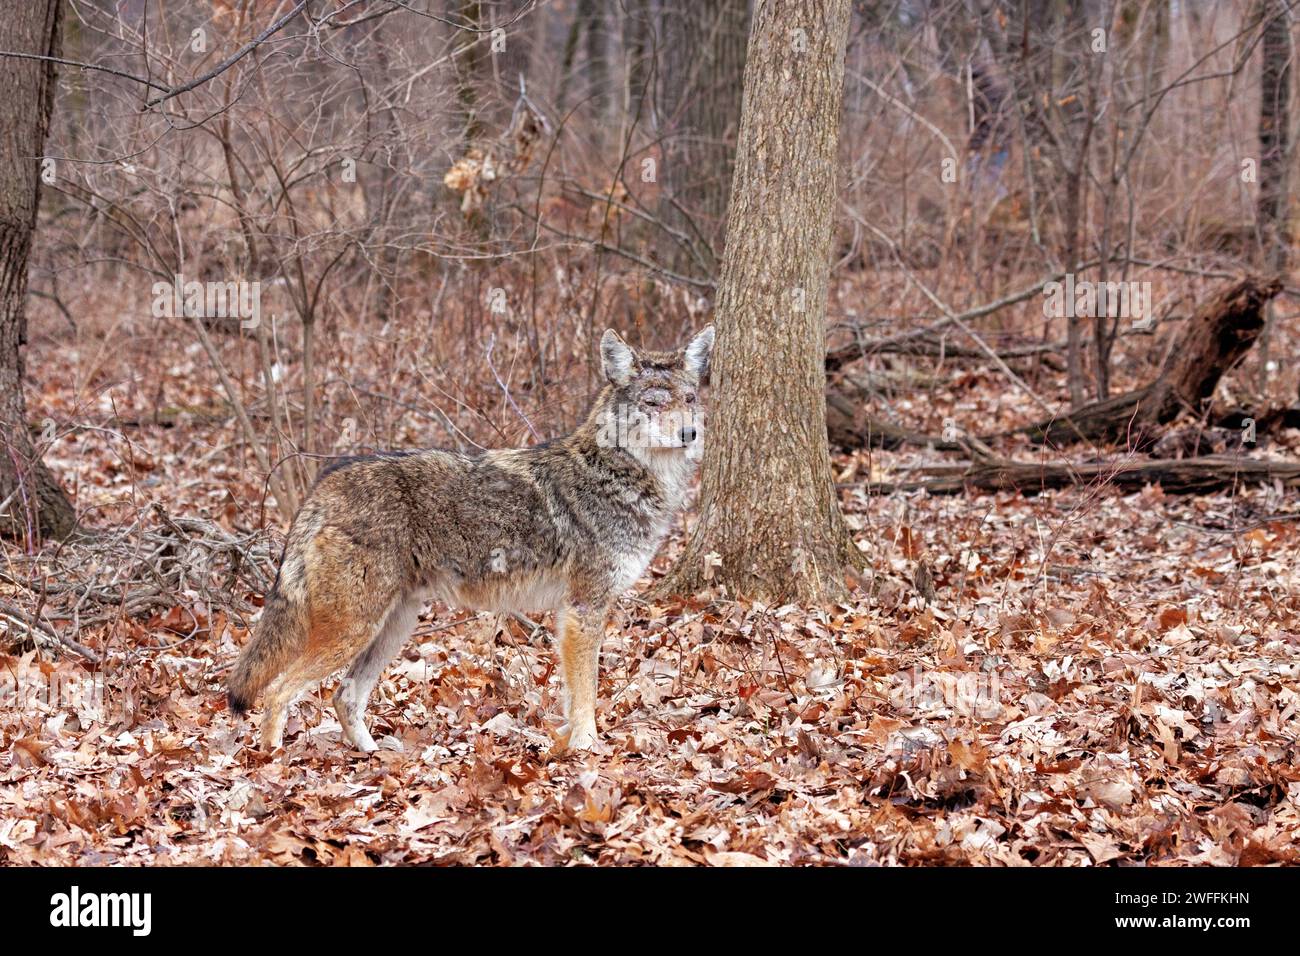 A coyote stands at attention nearly blending into the autumn colors of the forest. The coyote stares into the camera. Background of decaying orange le Stock Photo